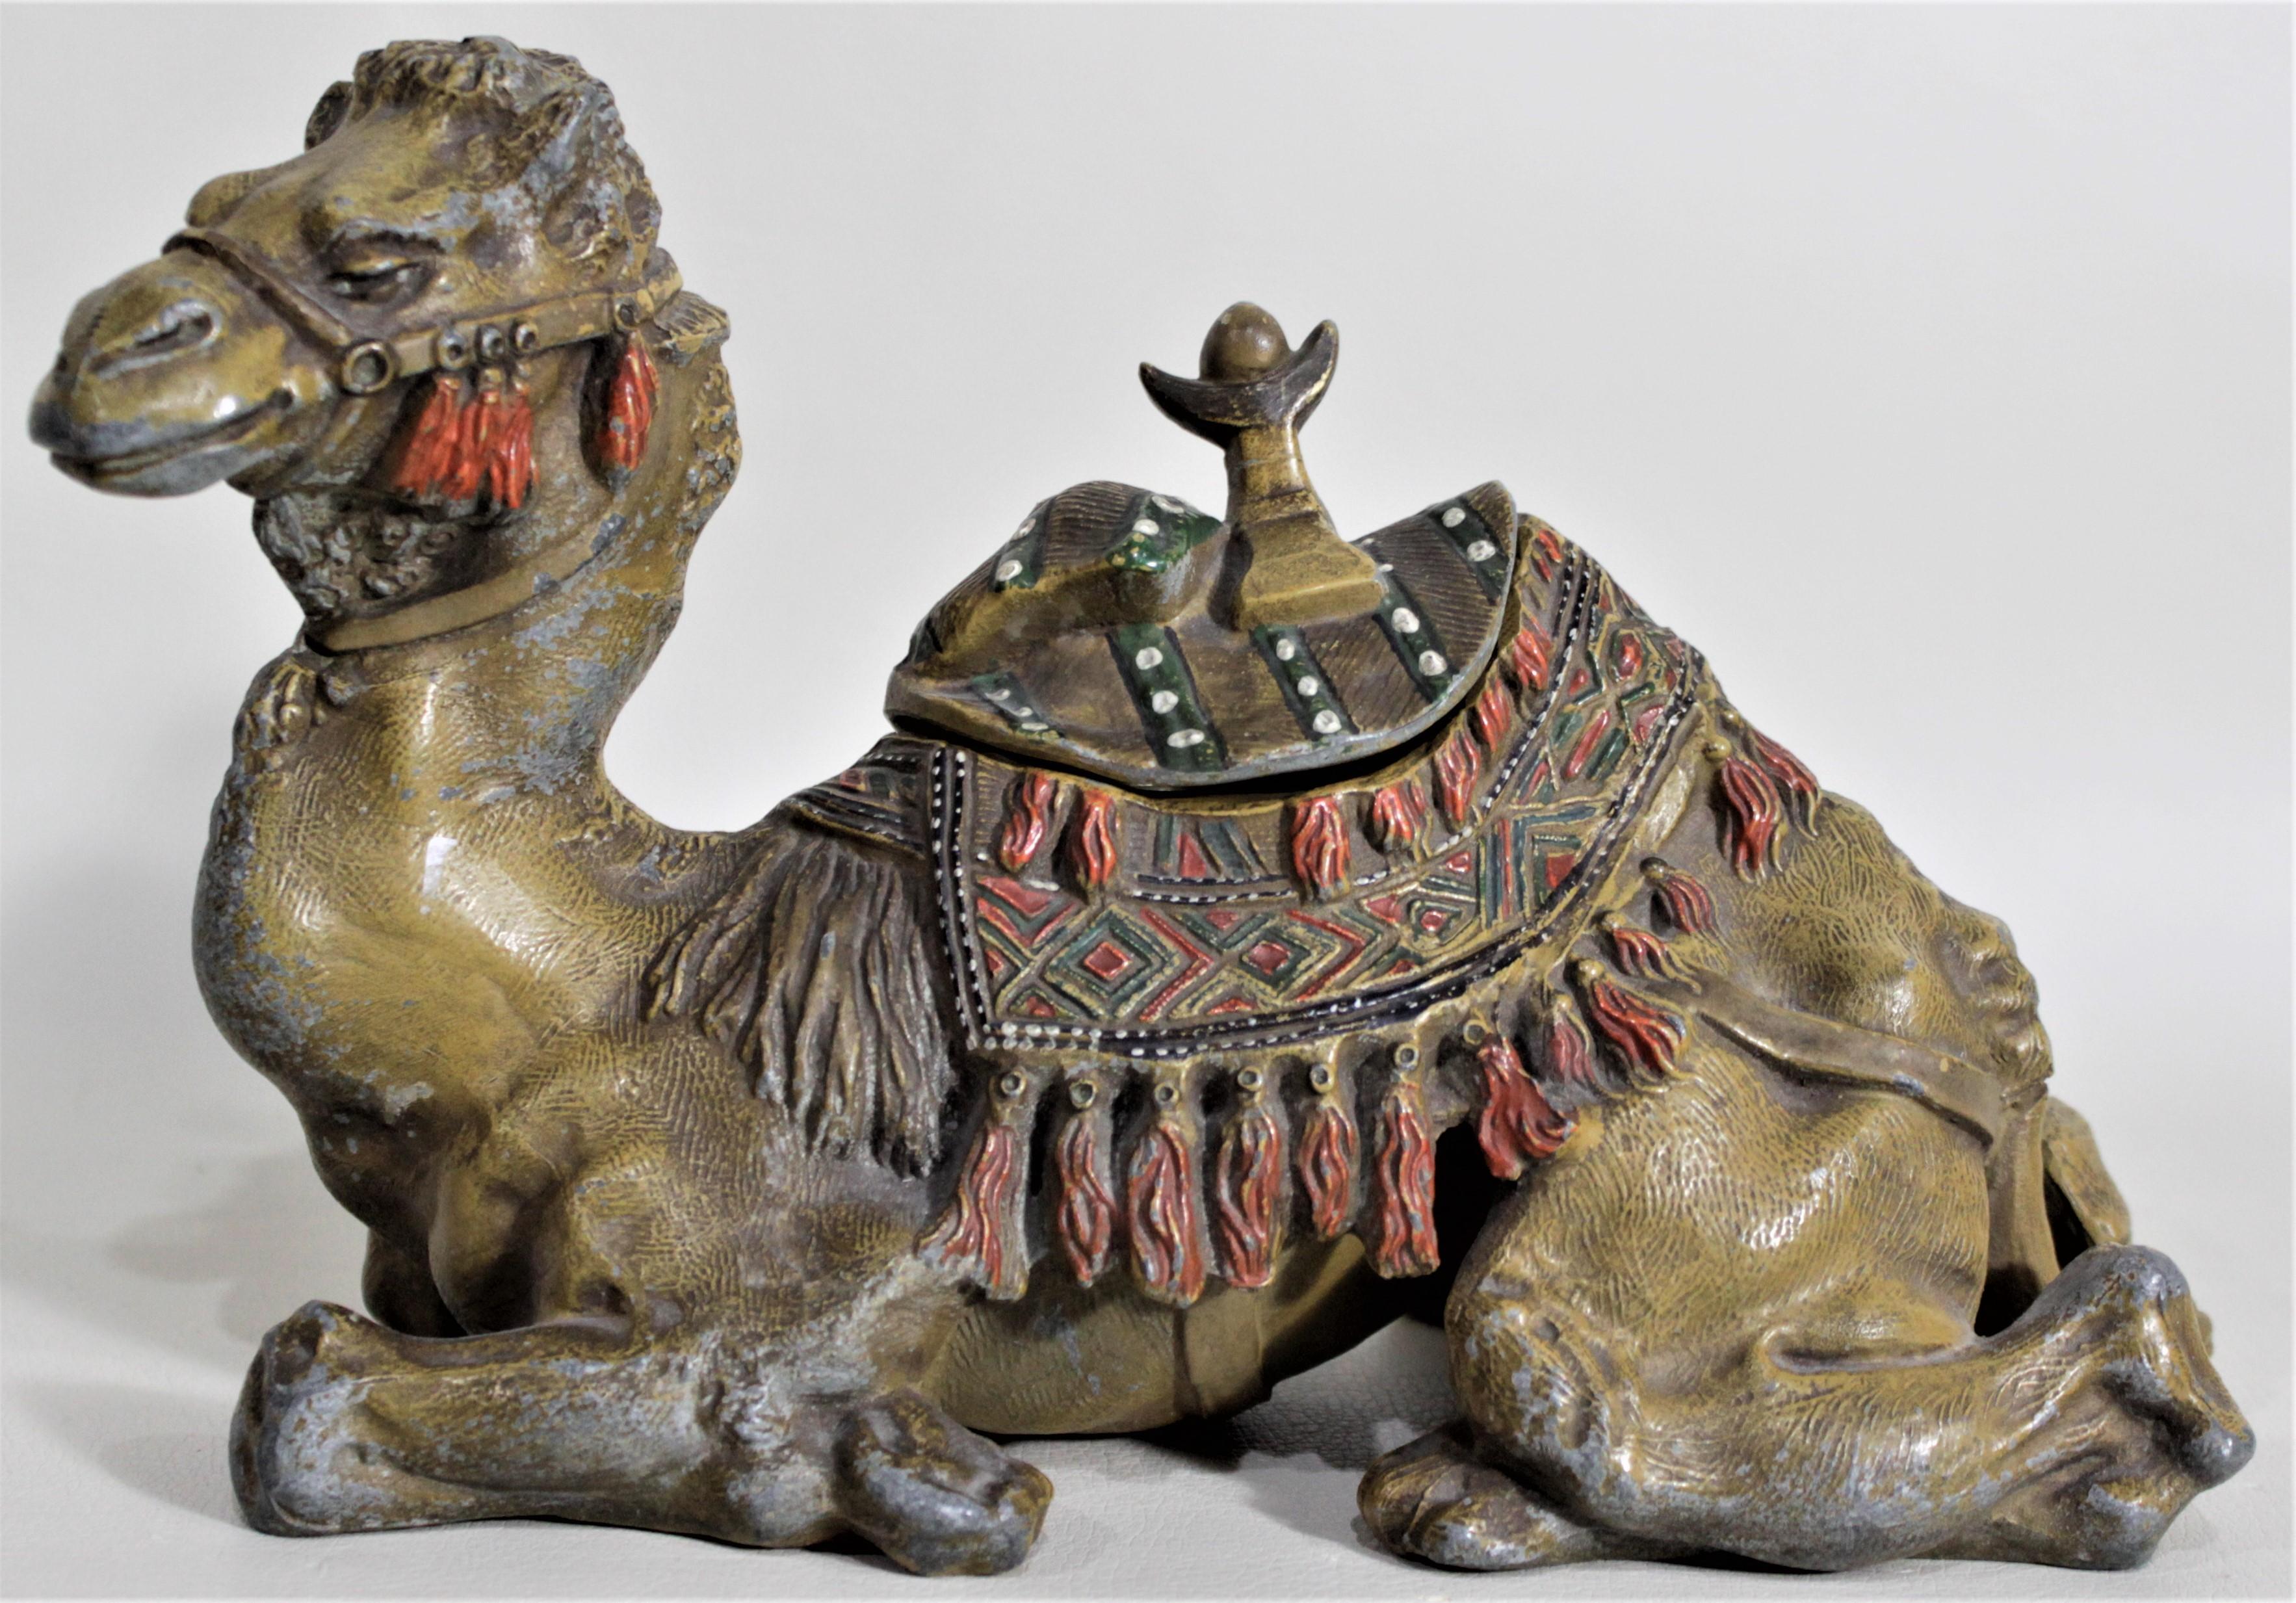 This antique cast and cold-painted inkwell has no maker's marks, but presumed to have been made in Austria in circa 1900 in the Anglo-Indian style. This ornately cast figural sitting camel has been ornately hand-painted in a realistic style and the